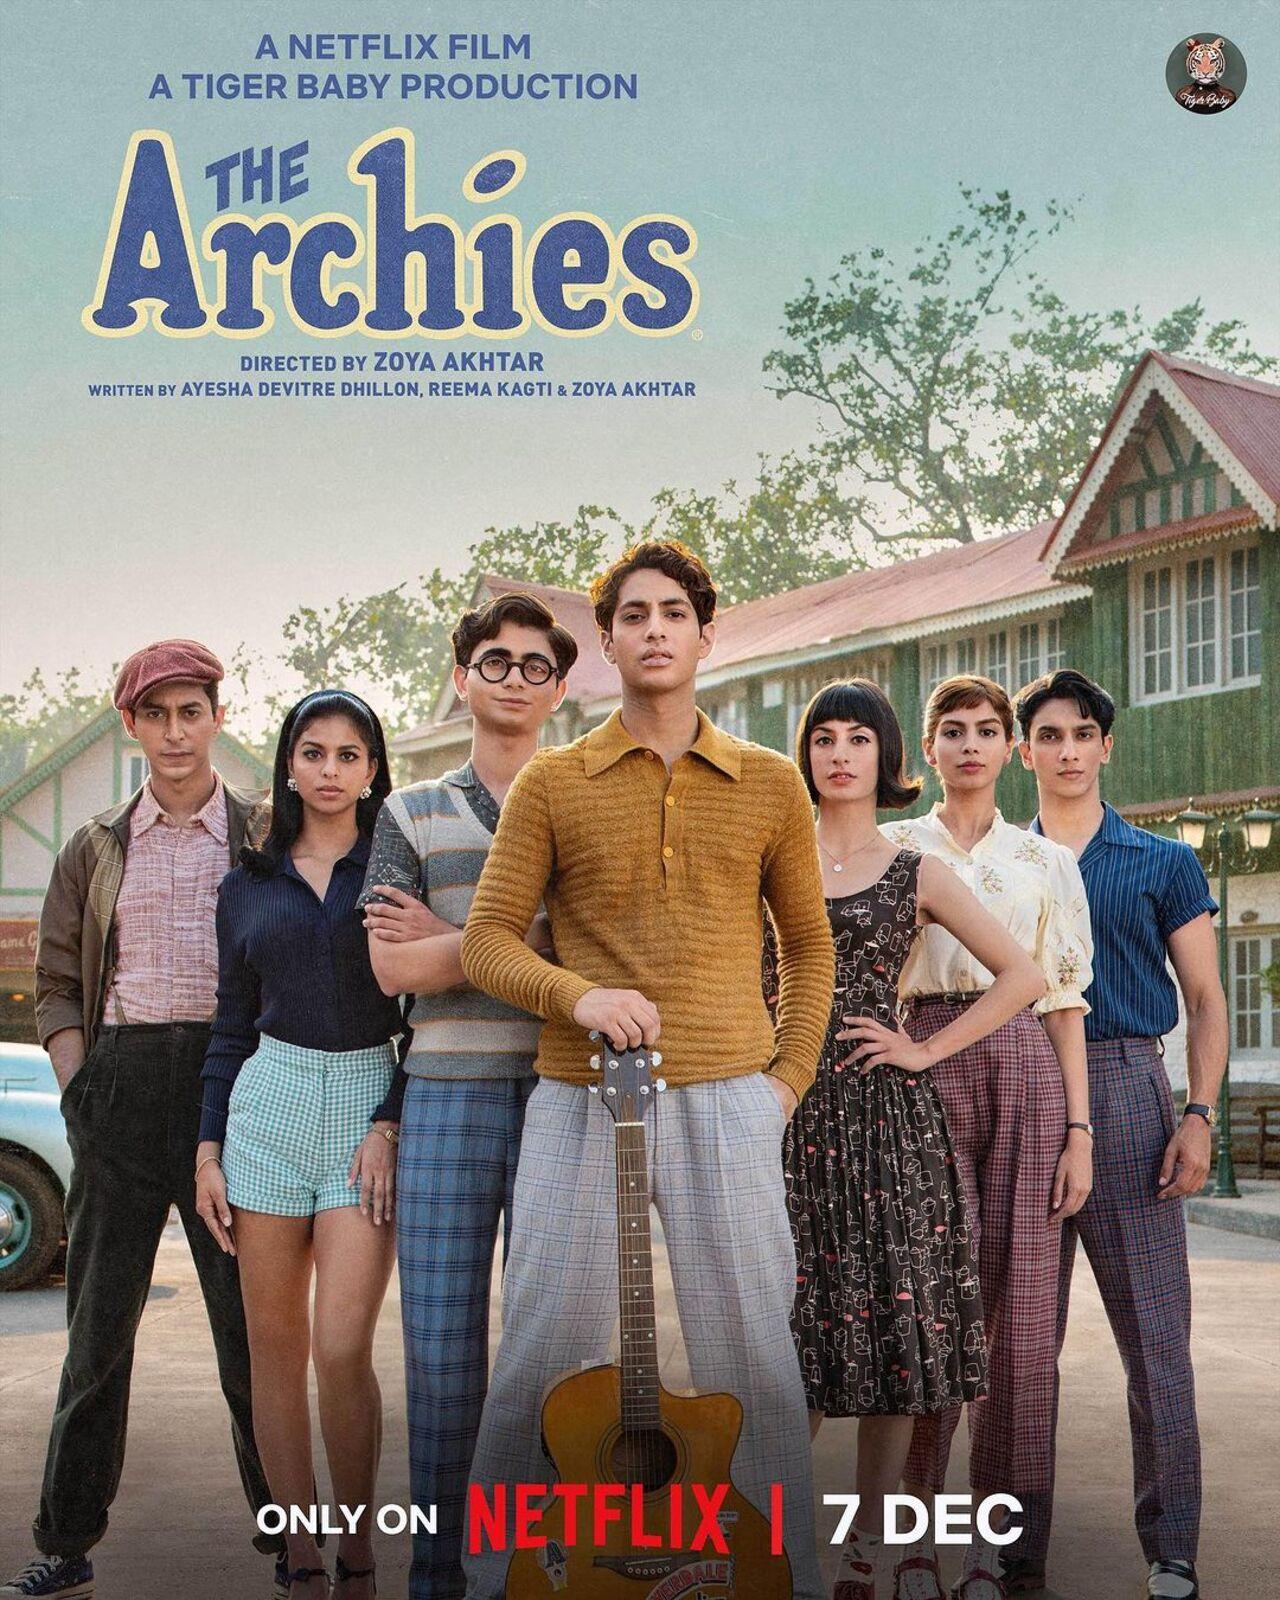 The Archies cast: For the first time ever, the entire cast of The Archies is reportedly making an appearance on the show. Suhana Khan, Khushi Kapoor, Agastya Nanda and others are expected